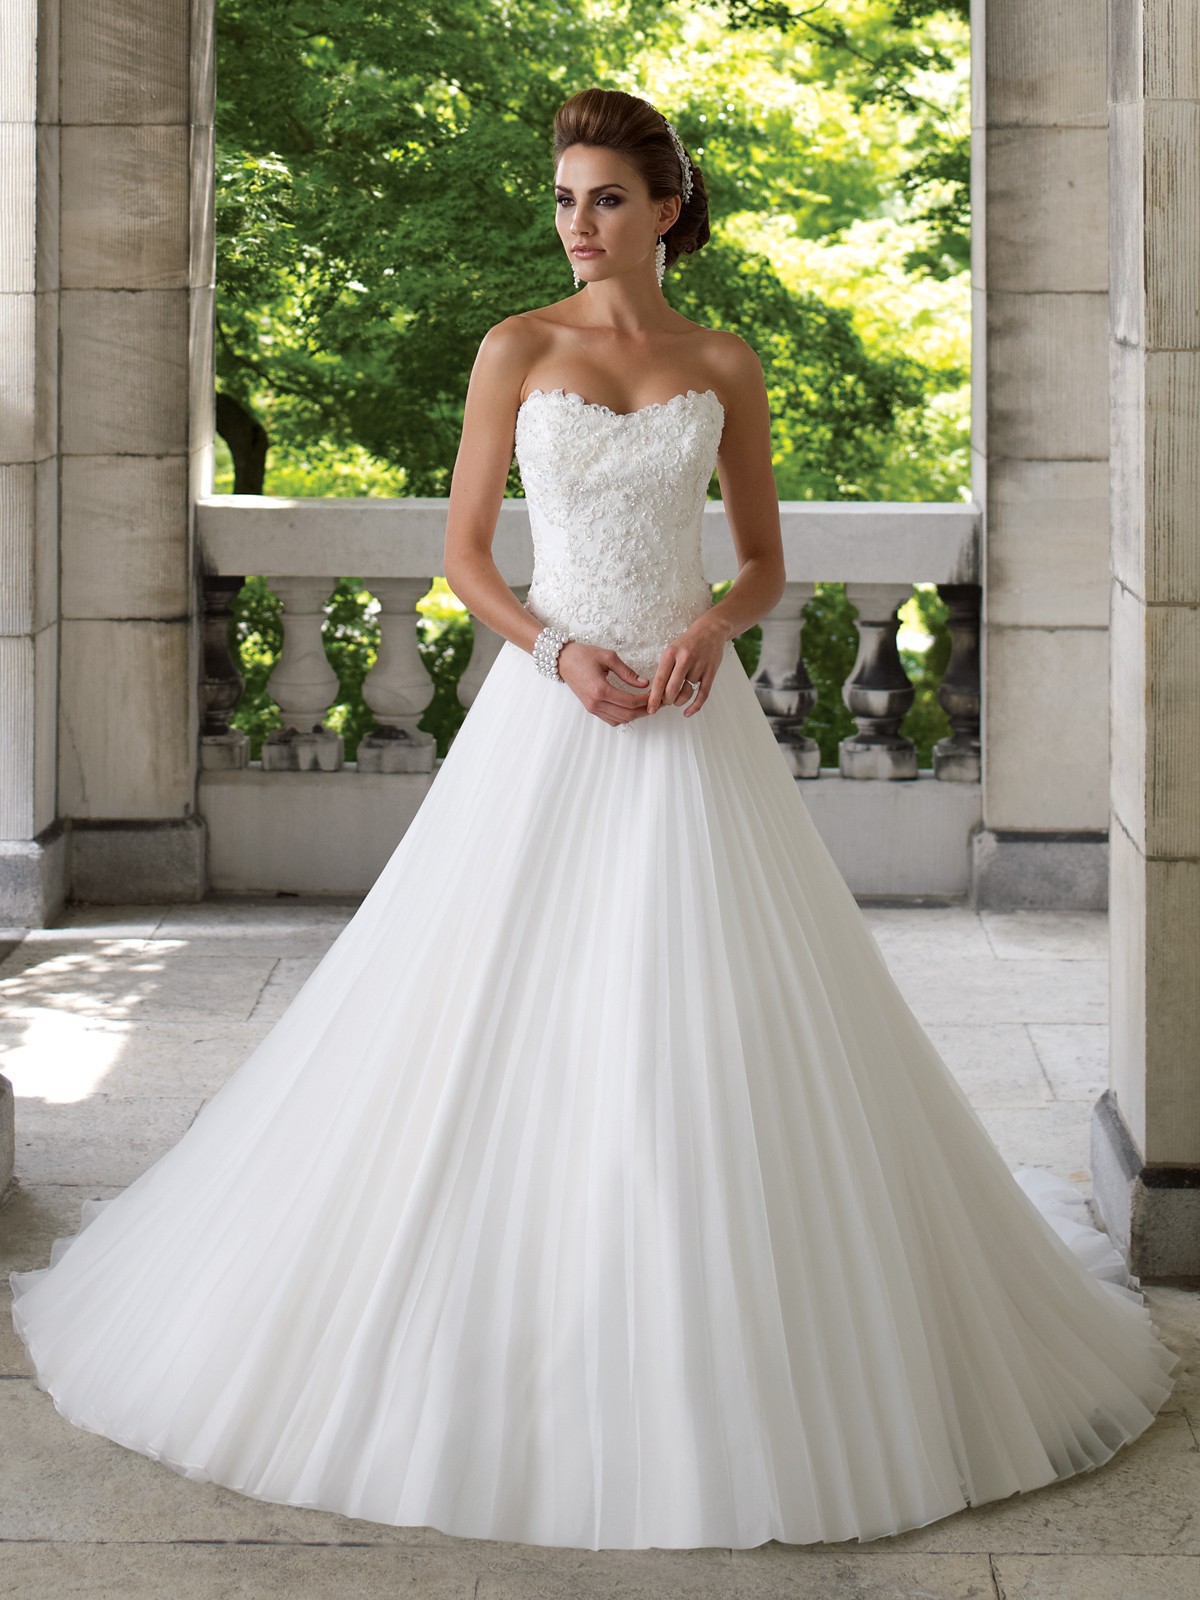 21 Gorgeous A-Line Wedding Dresses Ideas - The WoW Style